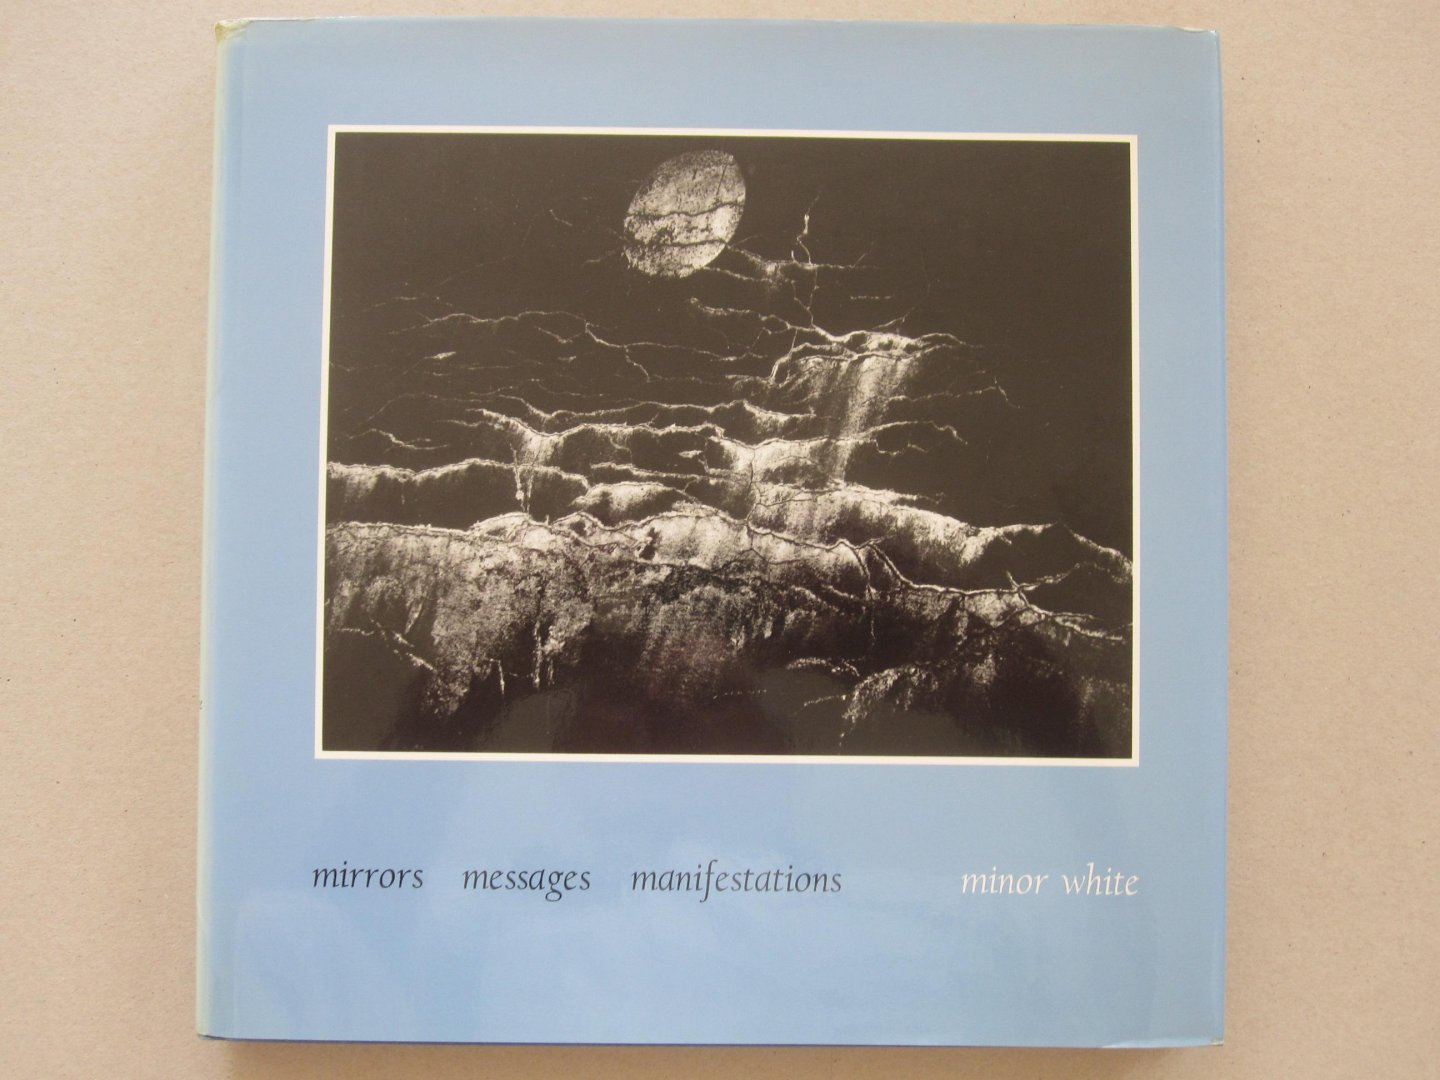 Minor White - Minor White - mirrors messages manifestations photographs and writings 1939-1968